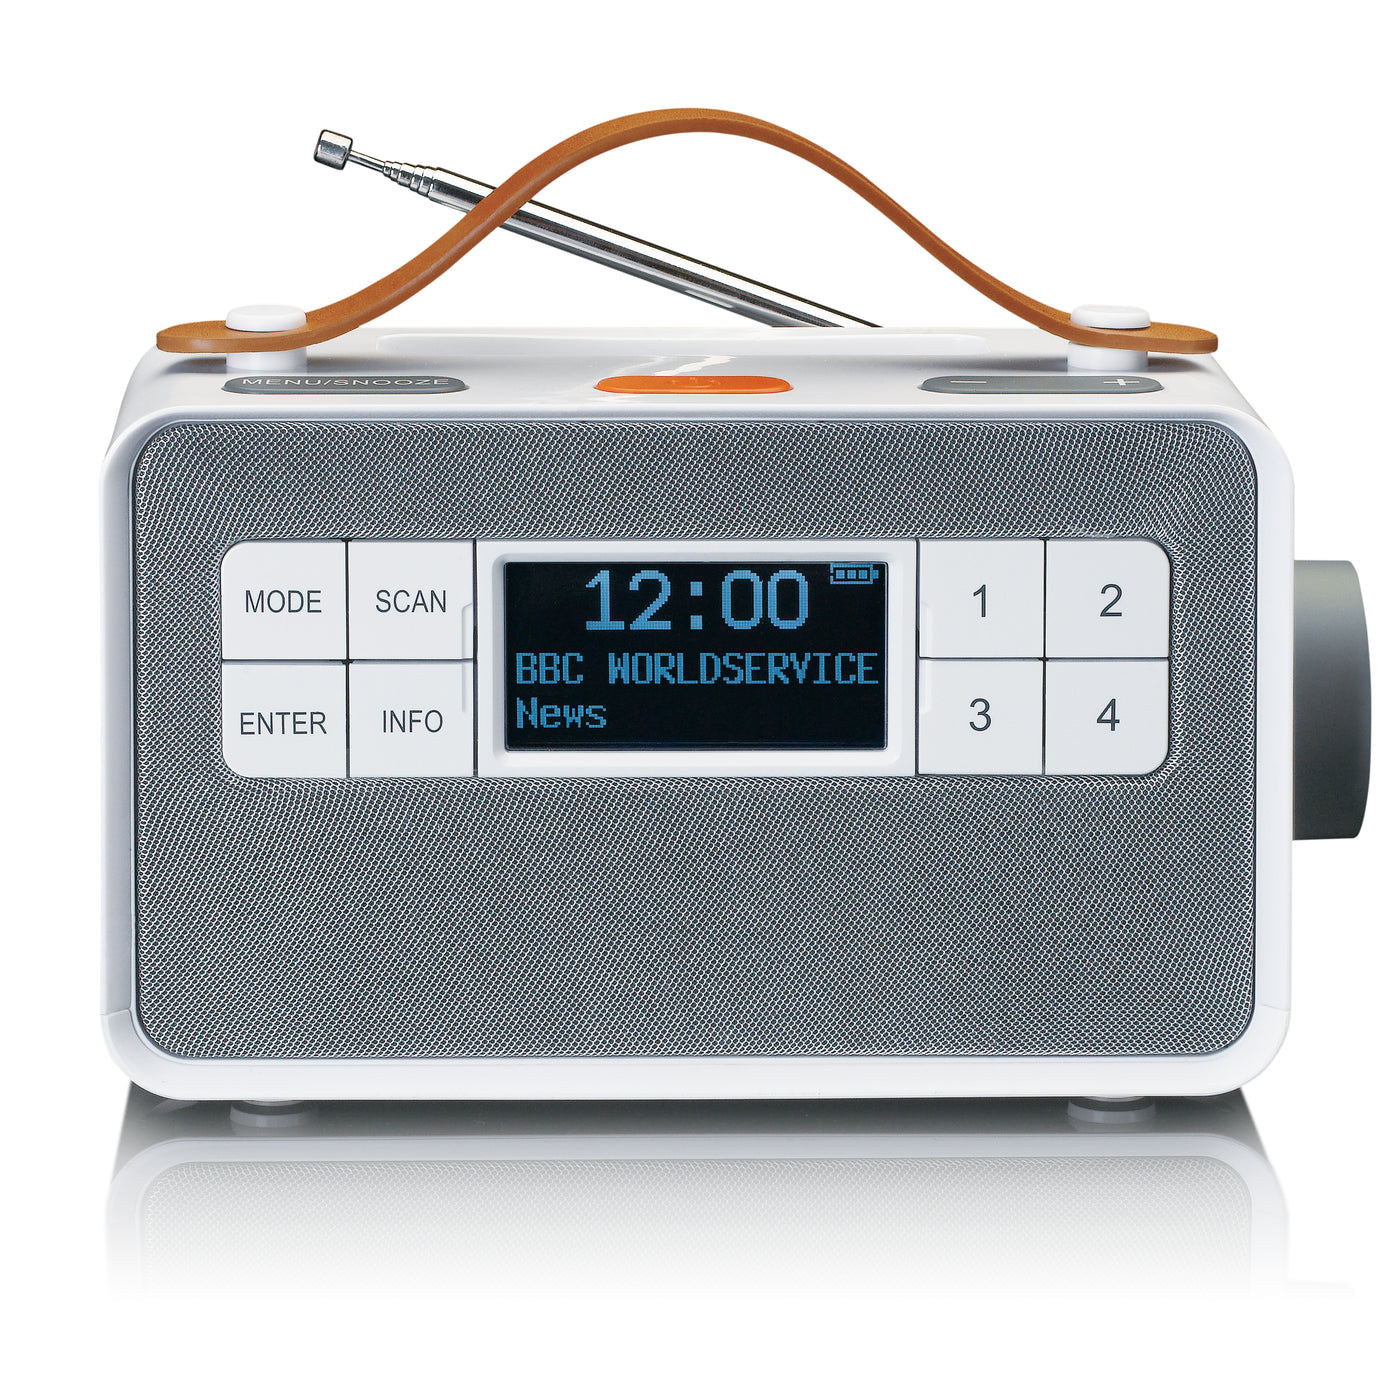 LENCO PDR-065WH - Portable senior FM/DAB+ radio with big buttons and "Easy Mode" function, white